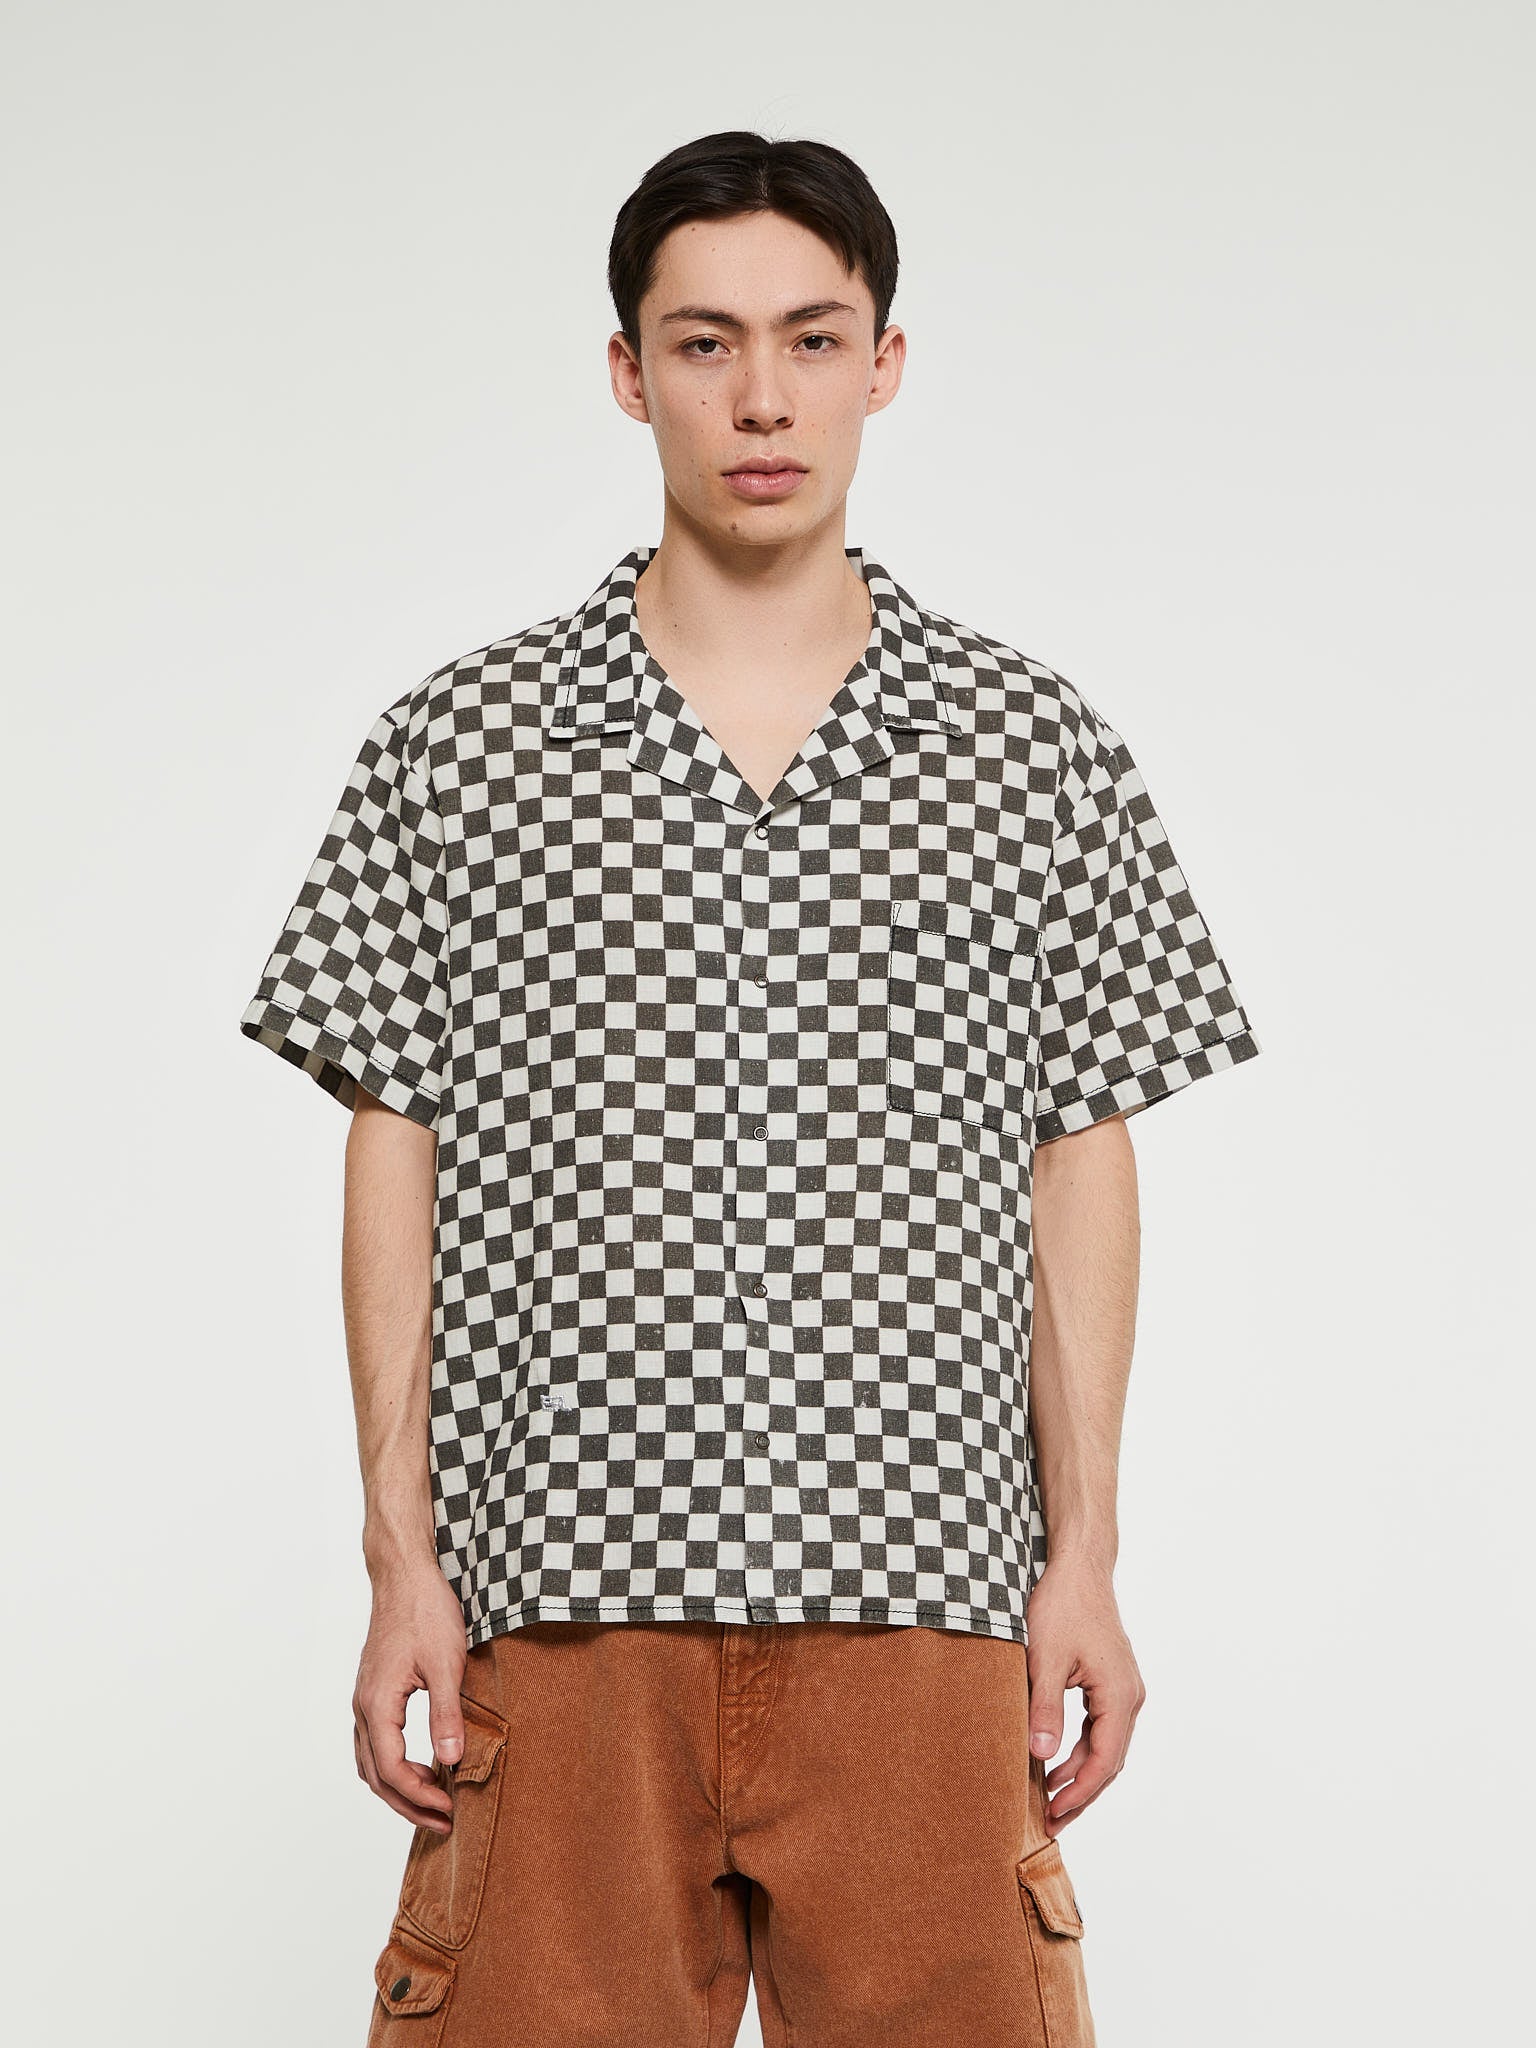 ERL - Printed Hawaian Shirt Woven in Black and White